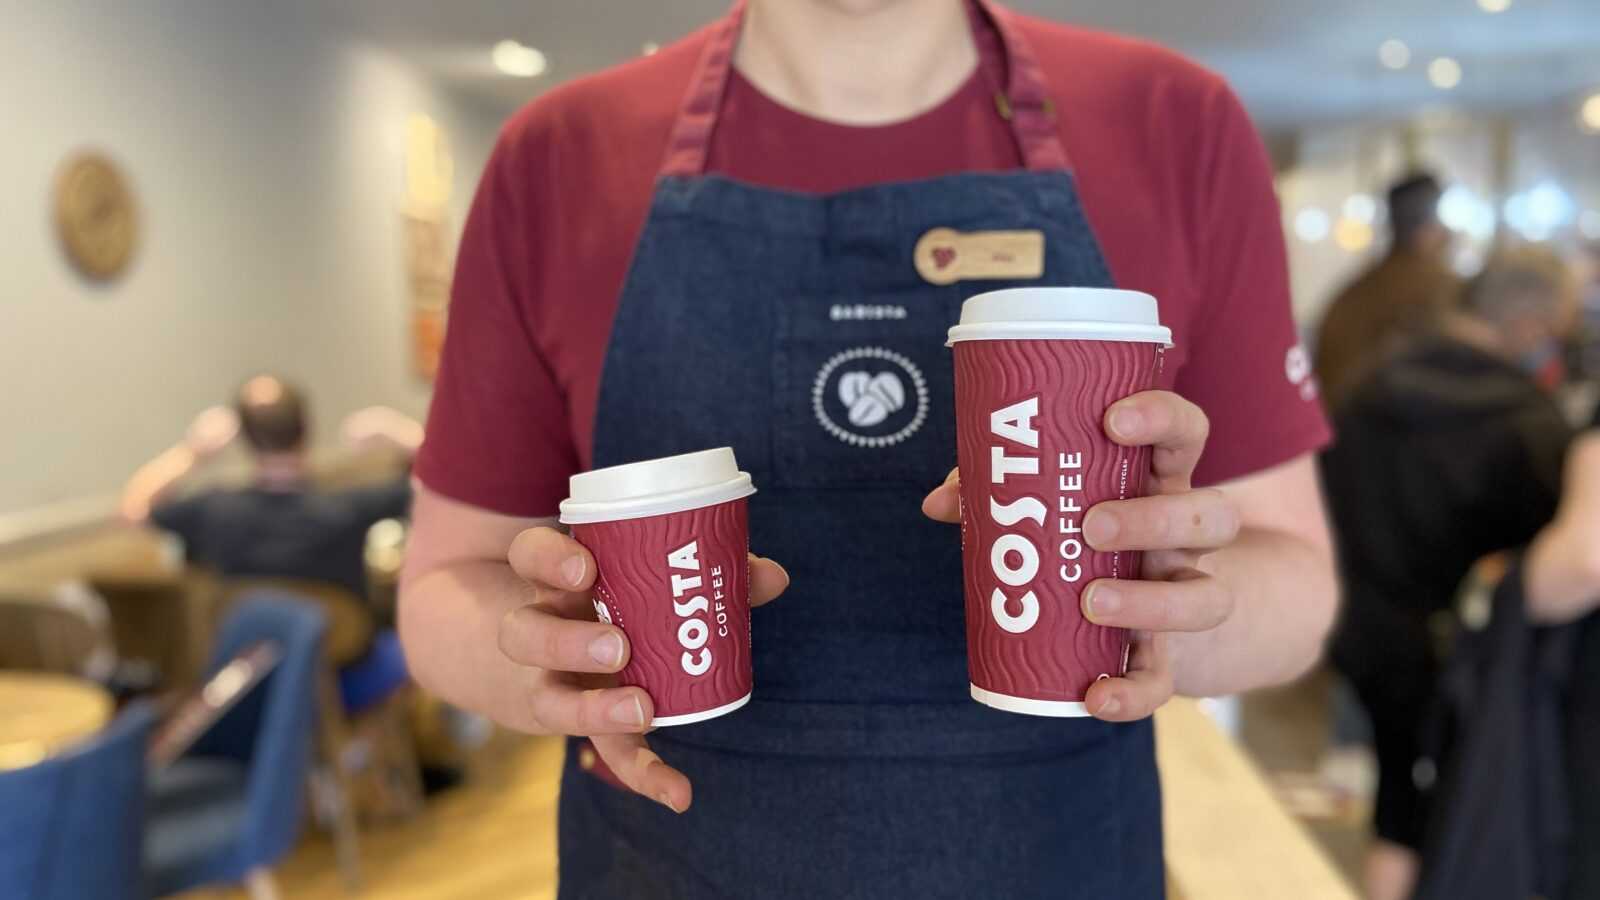 Costa Coffee introduces new Mini cup size, expands value meal deal range